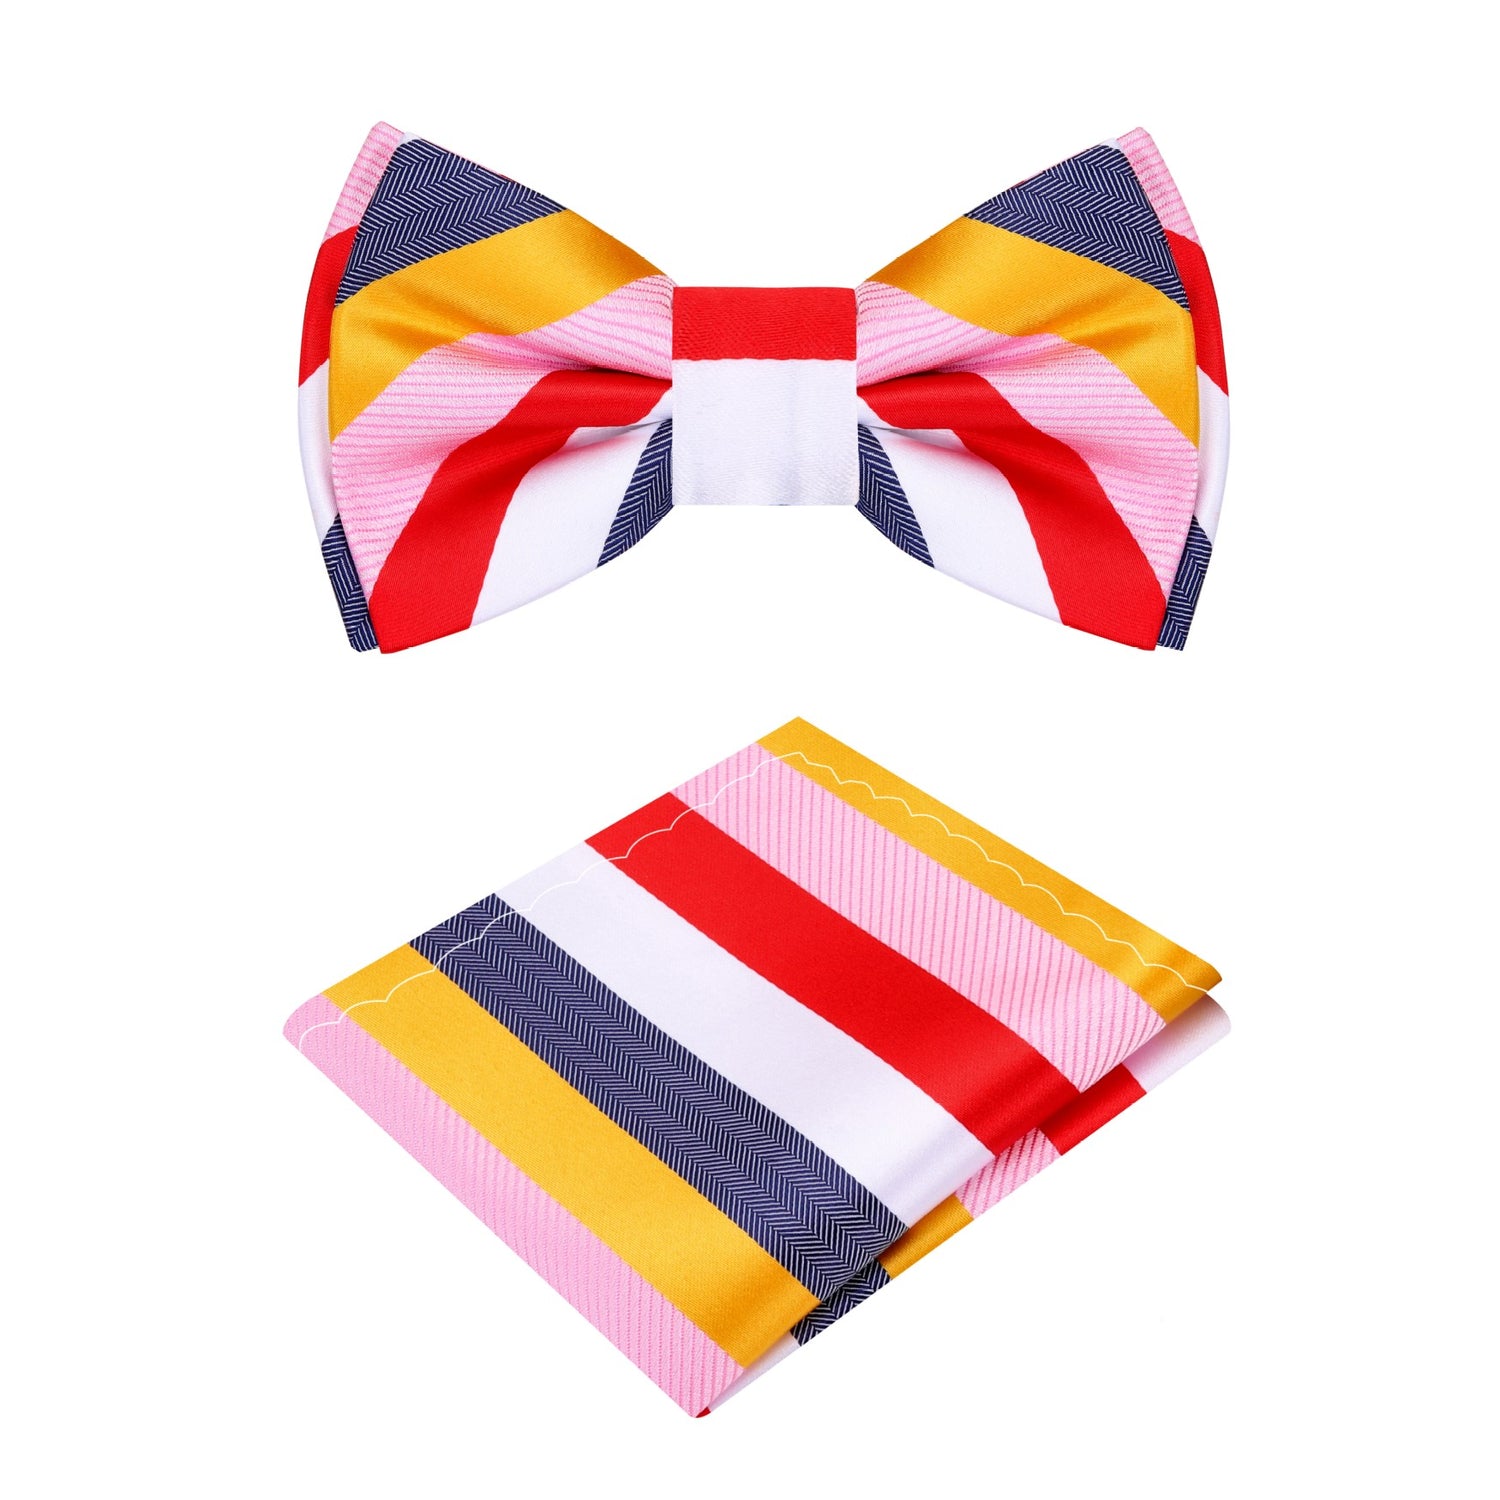 A Pink, Grey, Red, Yellow Stripe Pattern Silk Self Tie Bow Tie, Matching Pocket Square